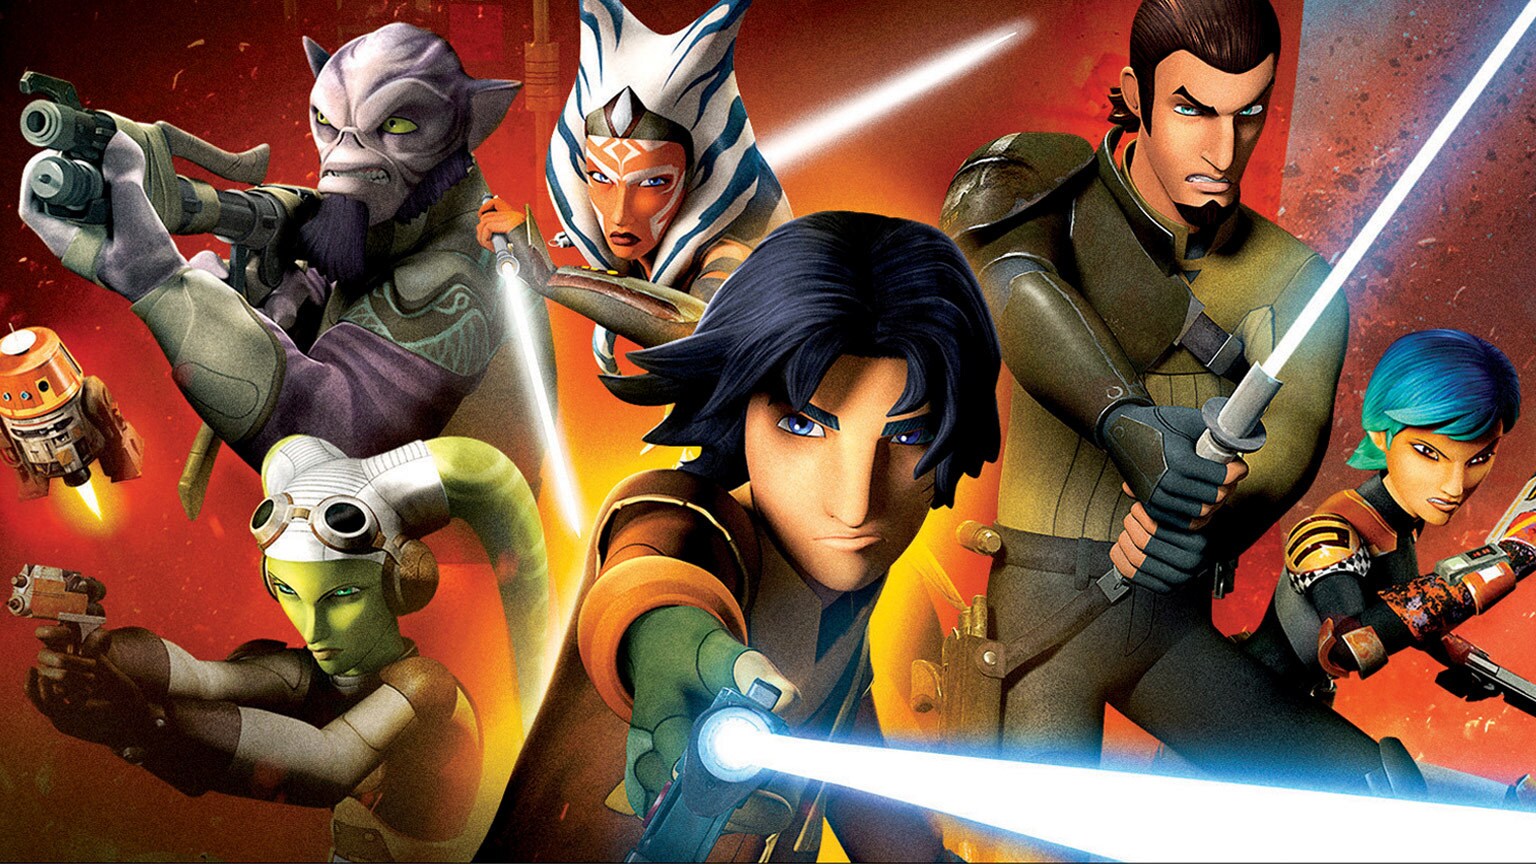 Star Wars Rebels: Complete Season Two Available Now on Blu-ray 